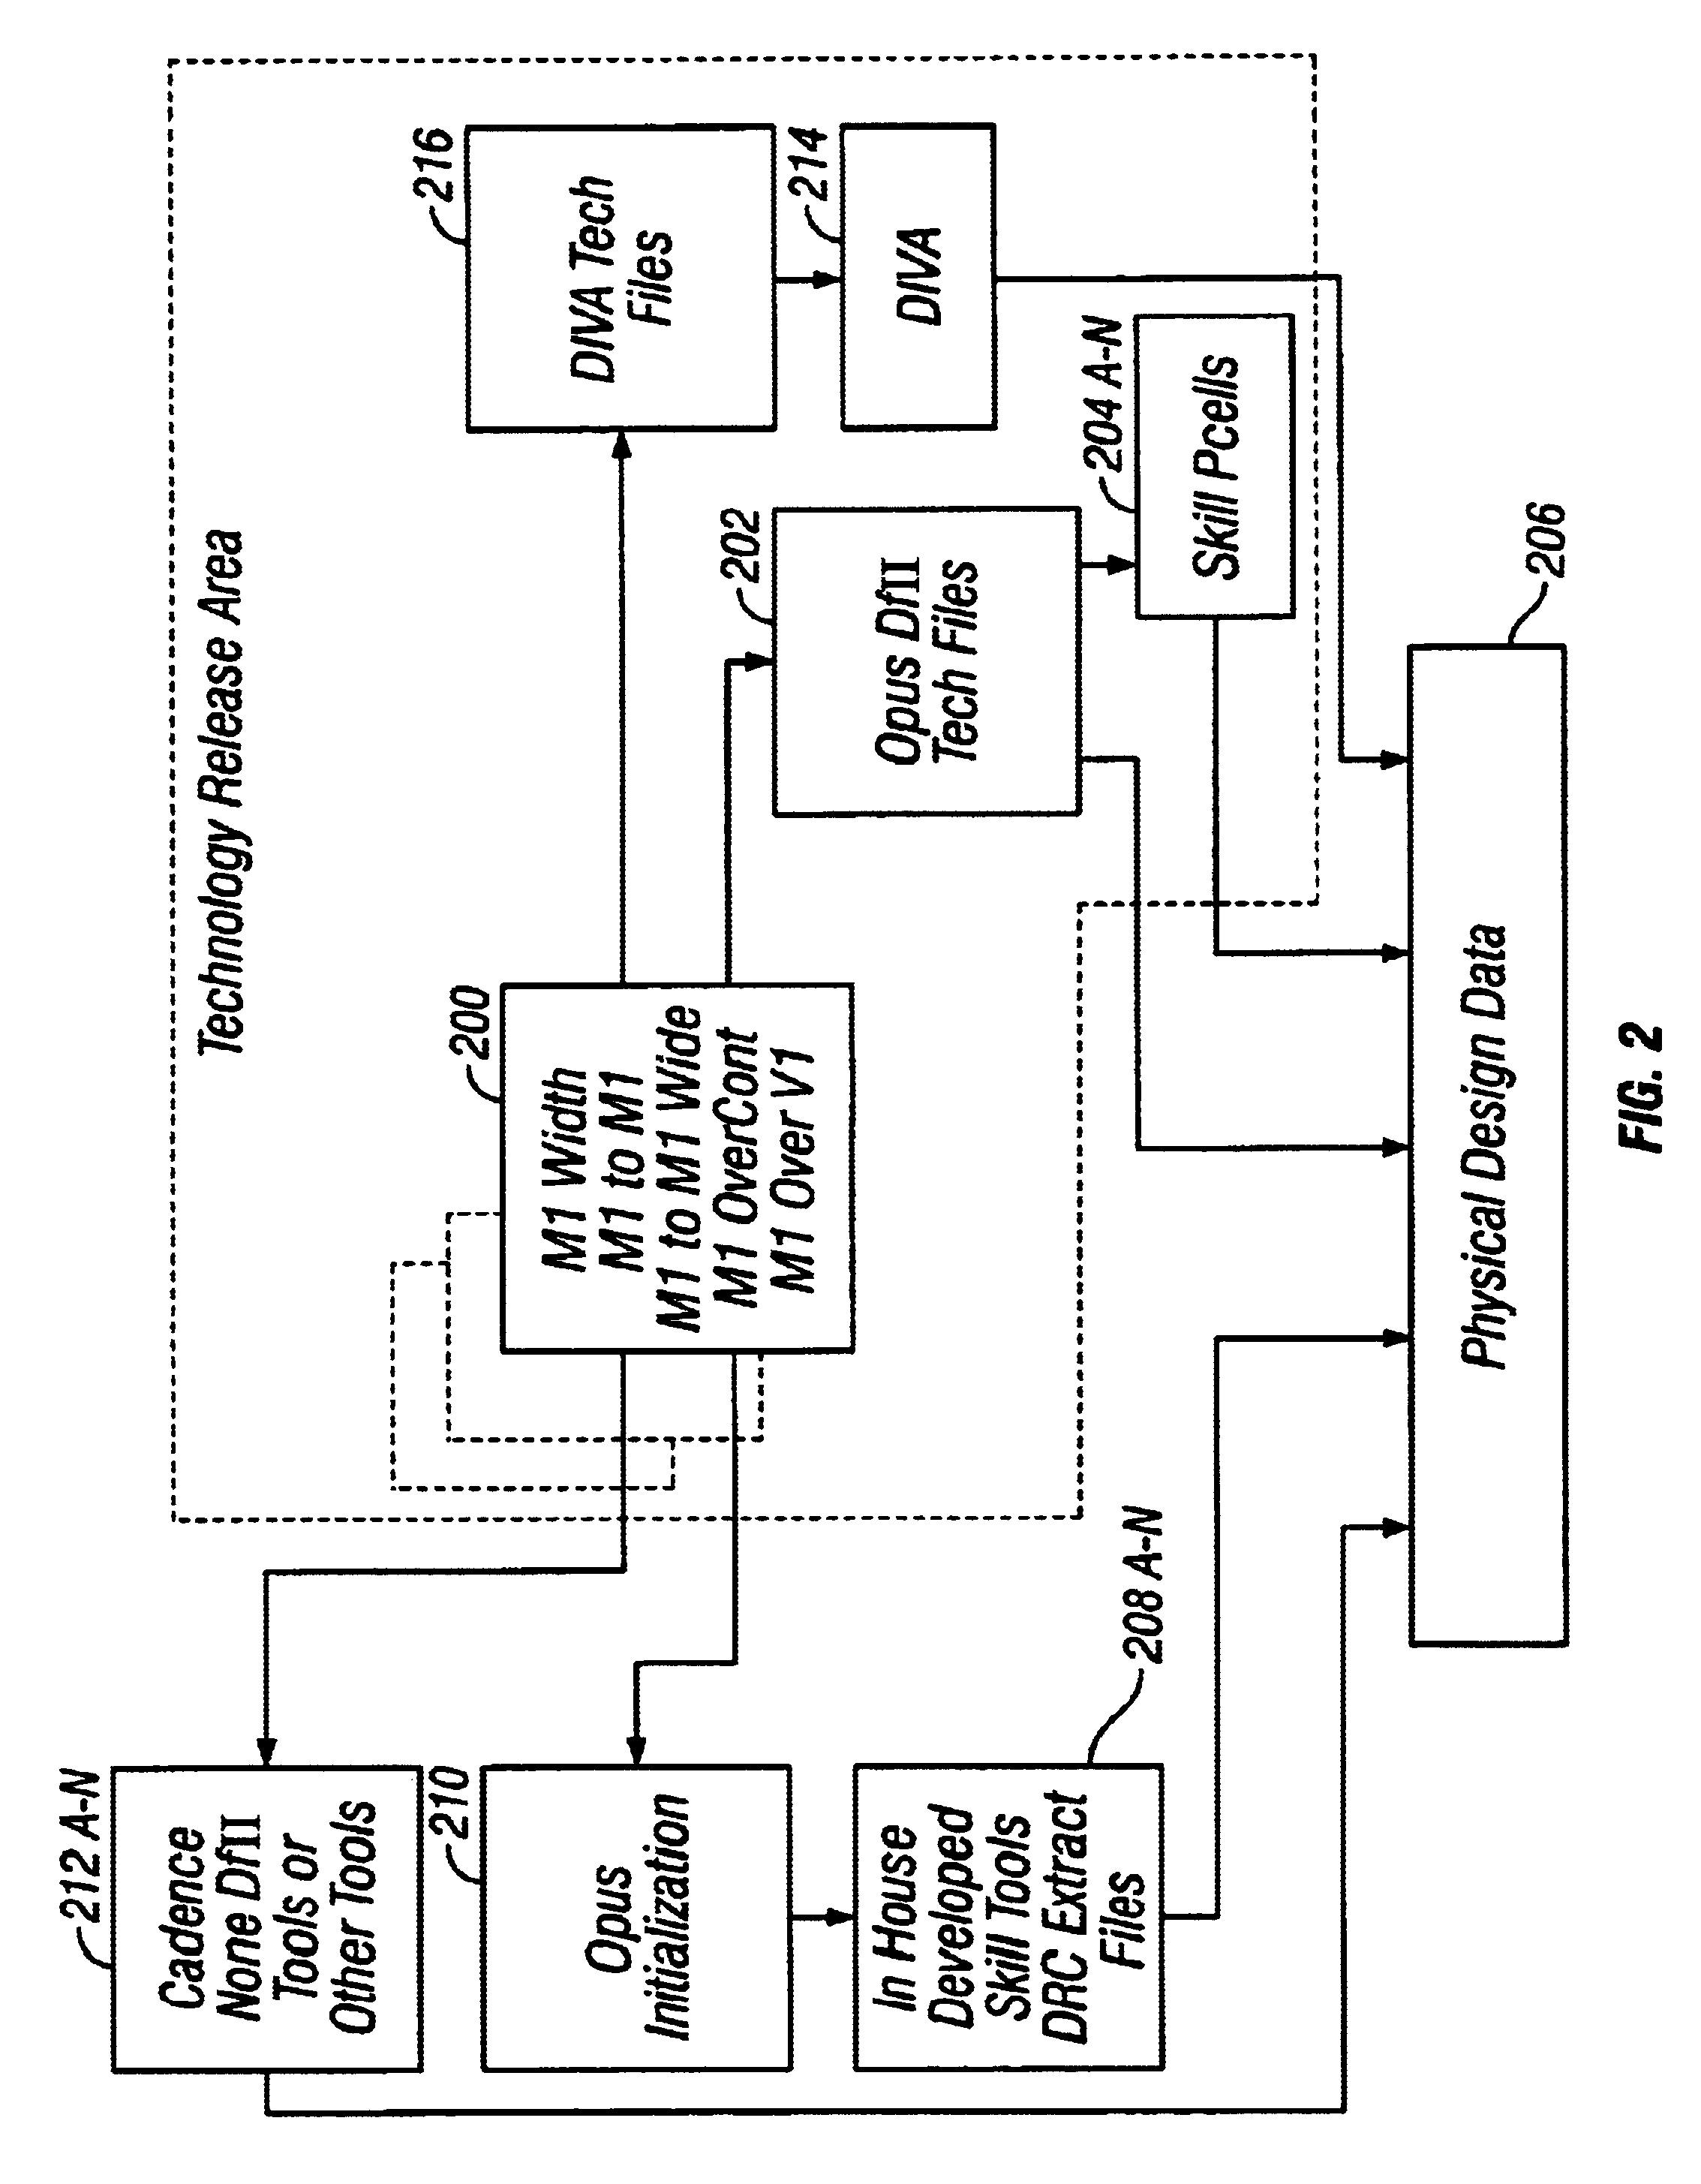 Method and system for automating design rule check error correction in a CAD environment